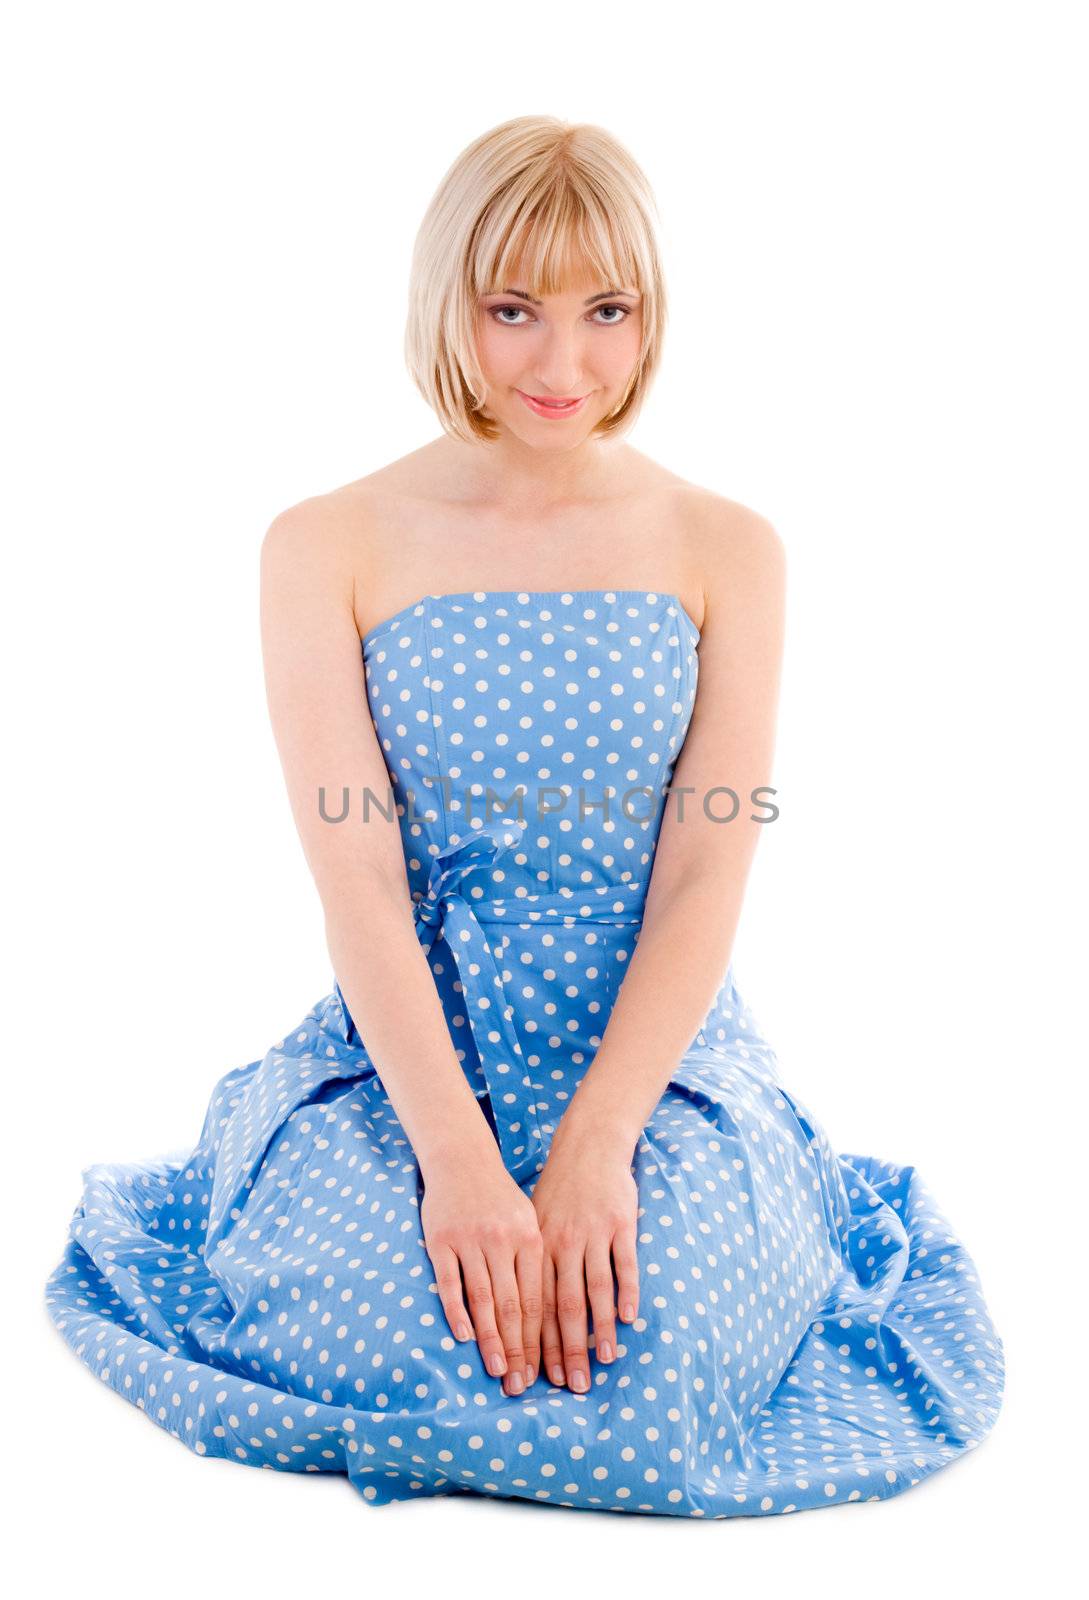 Sitting woman in blue polka dot dress by mihhailov